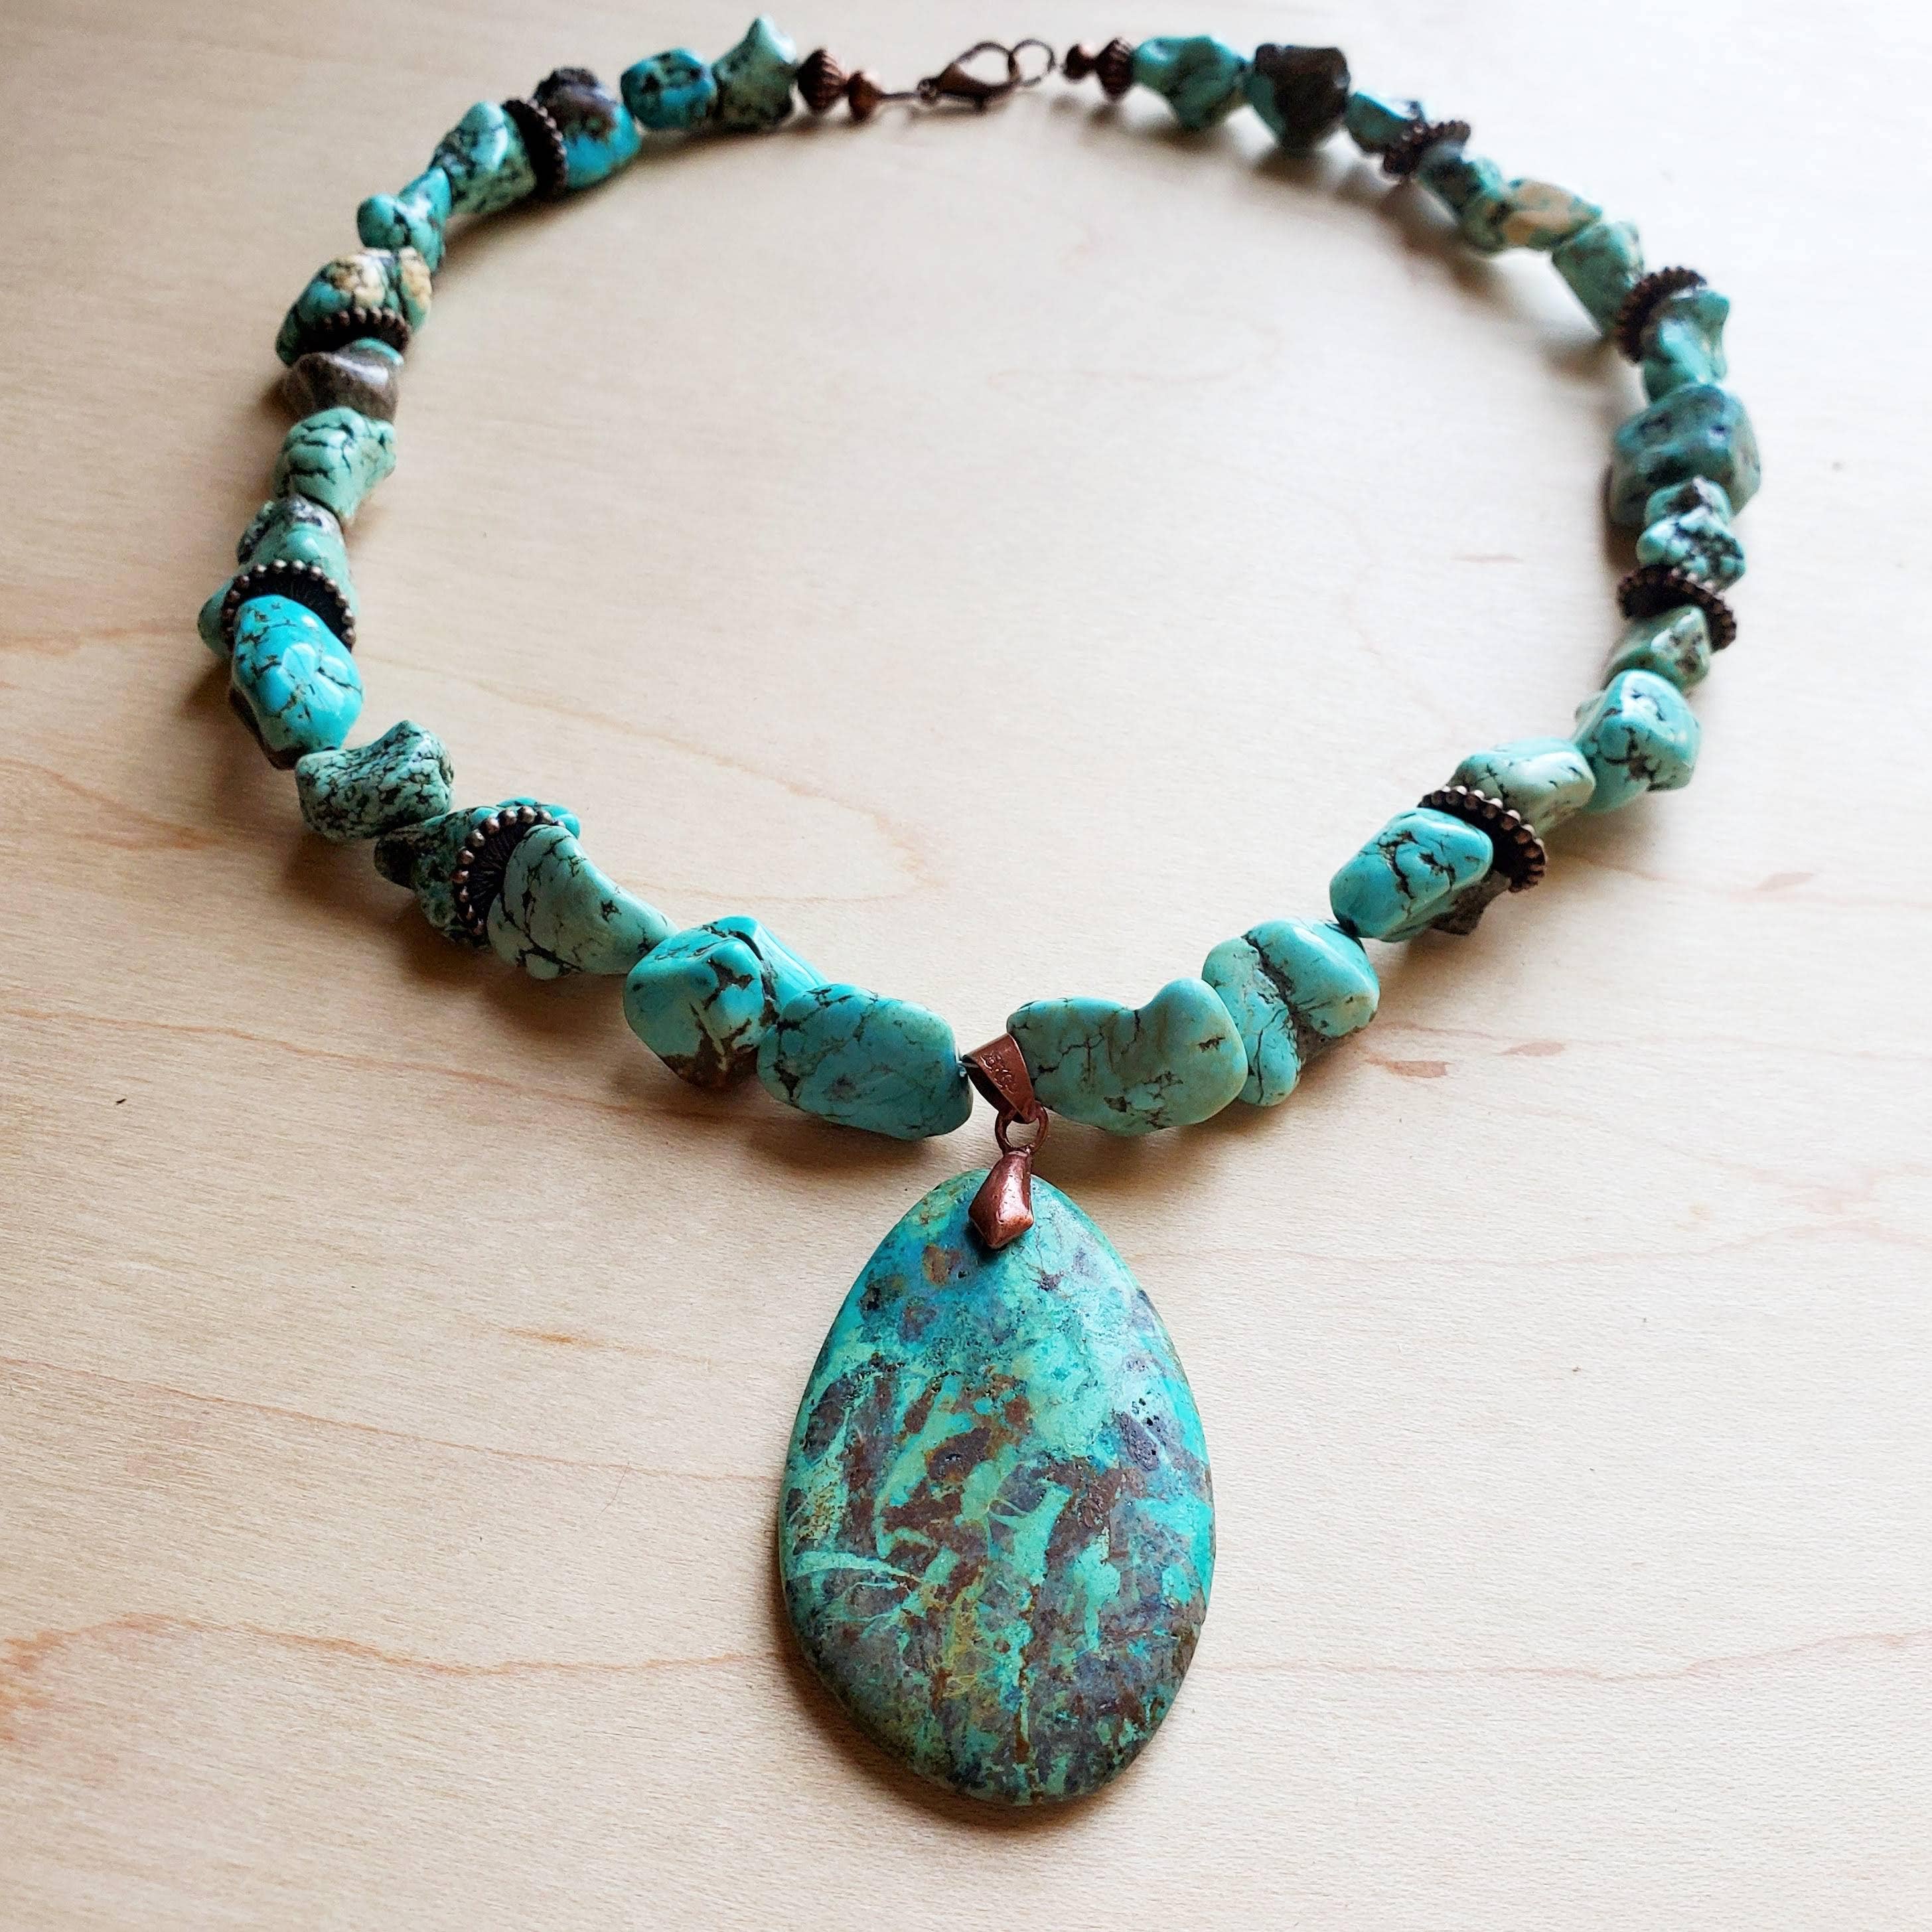 Chunky Turquoise Necklace with Natural Teardrop Pendant - Forever Western Boutique